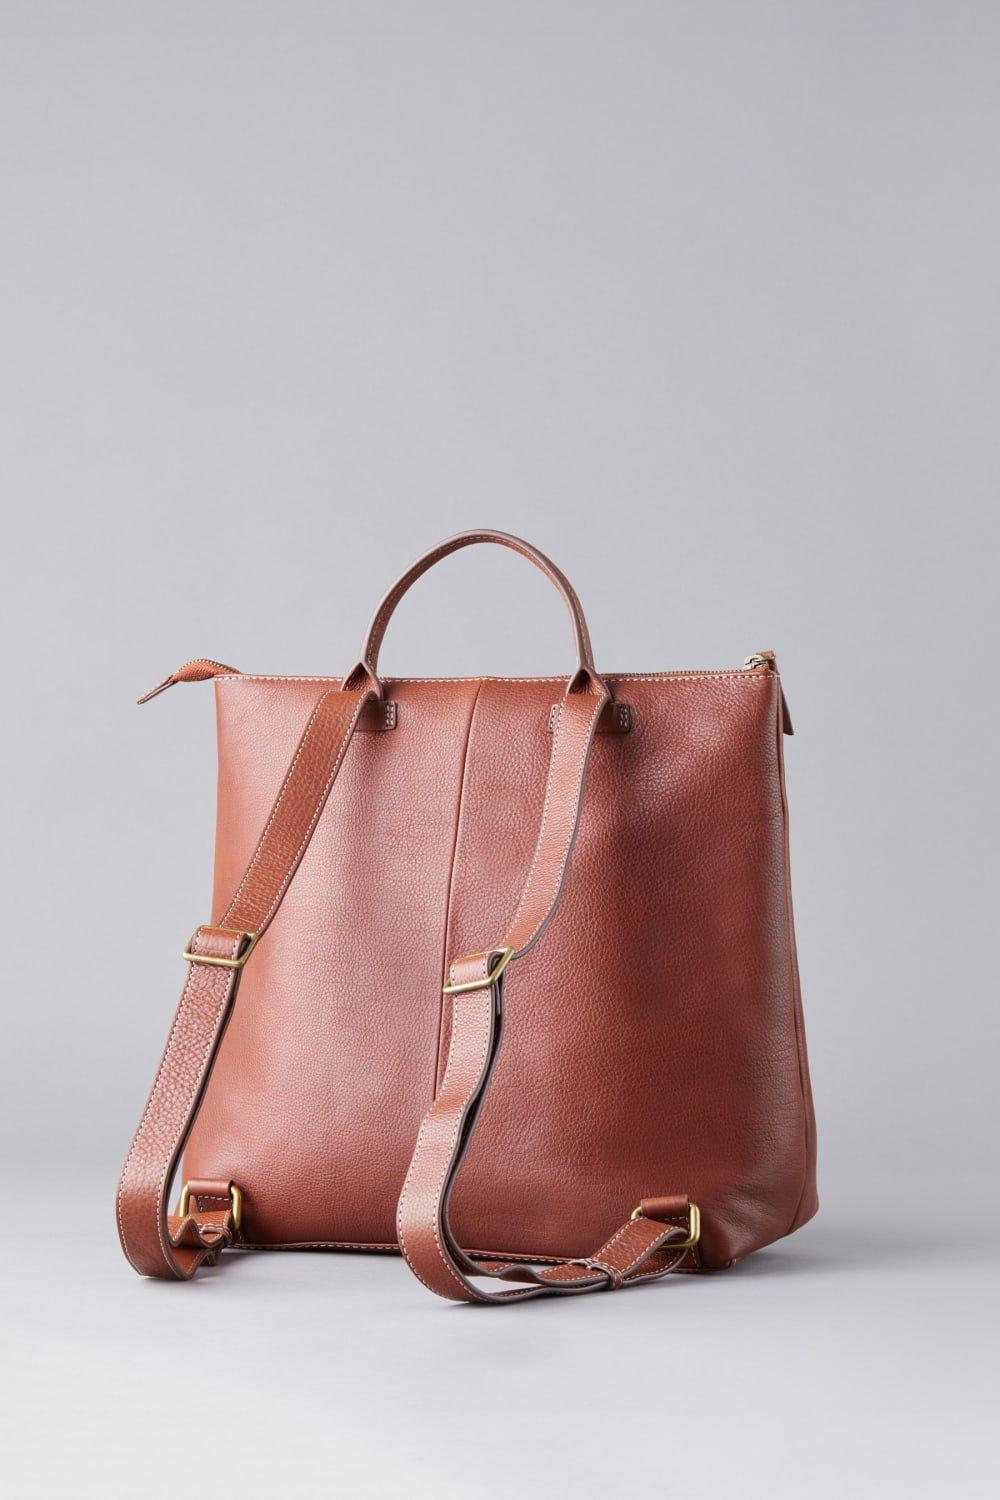 Lakeland Leather Torver Leather Tote Bag in Tan One Size